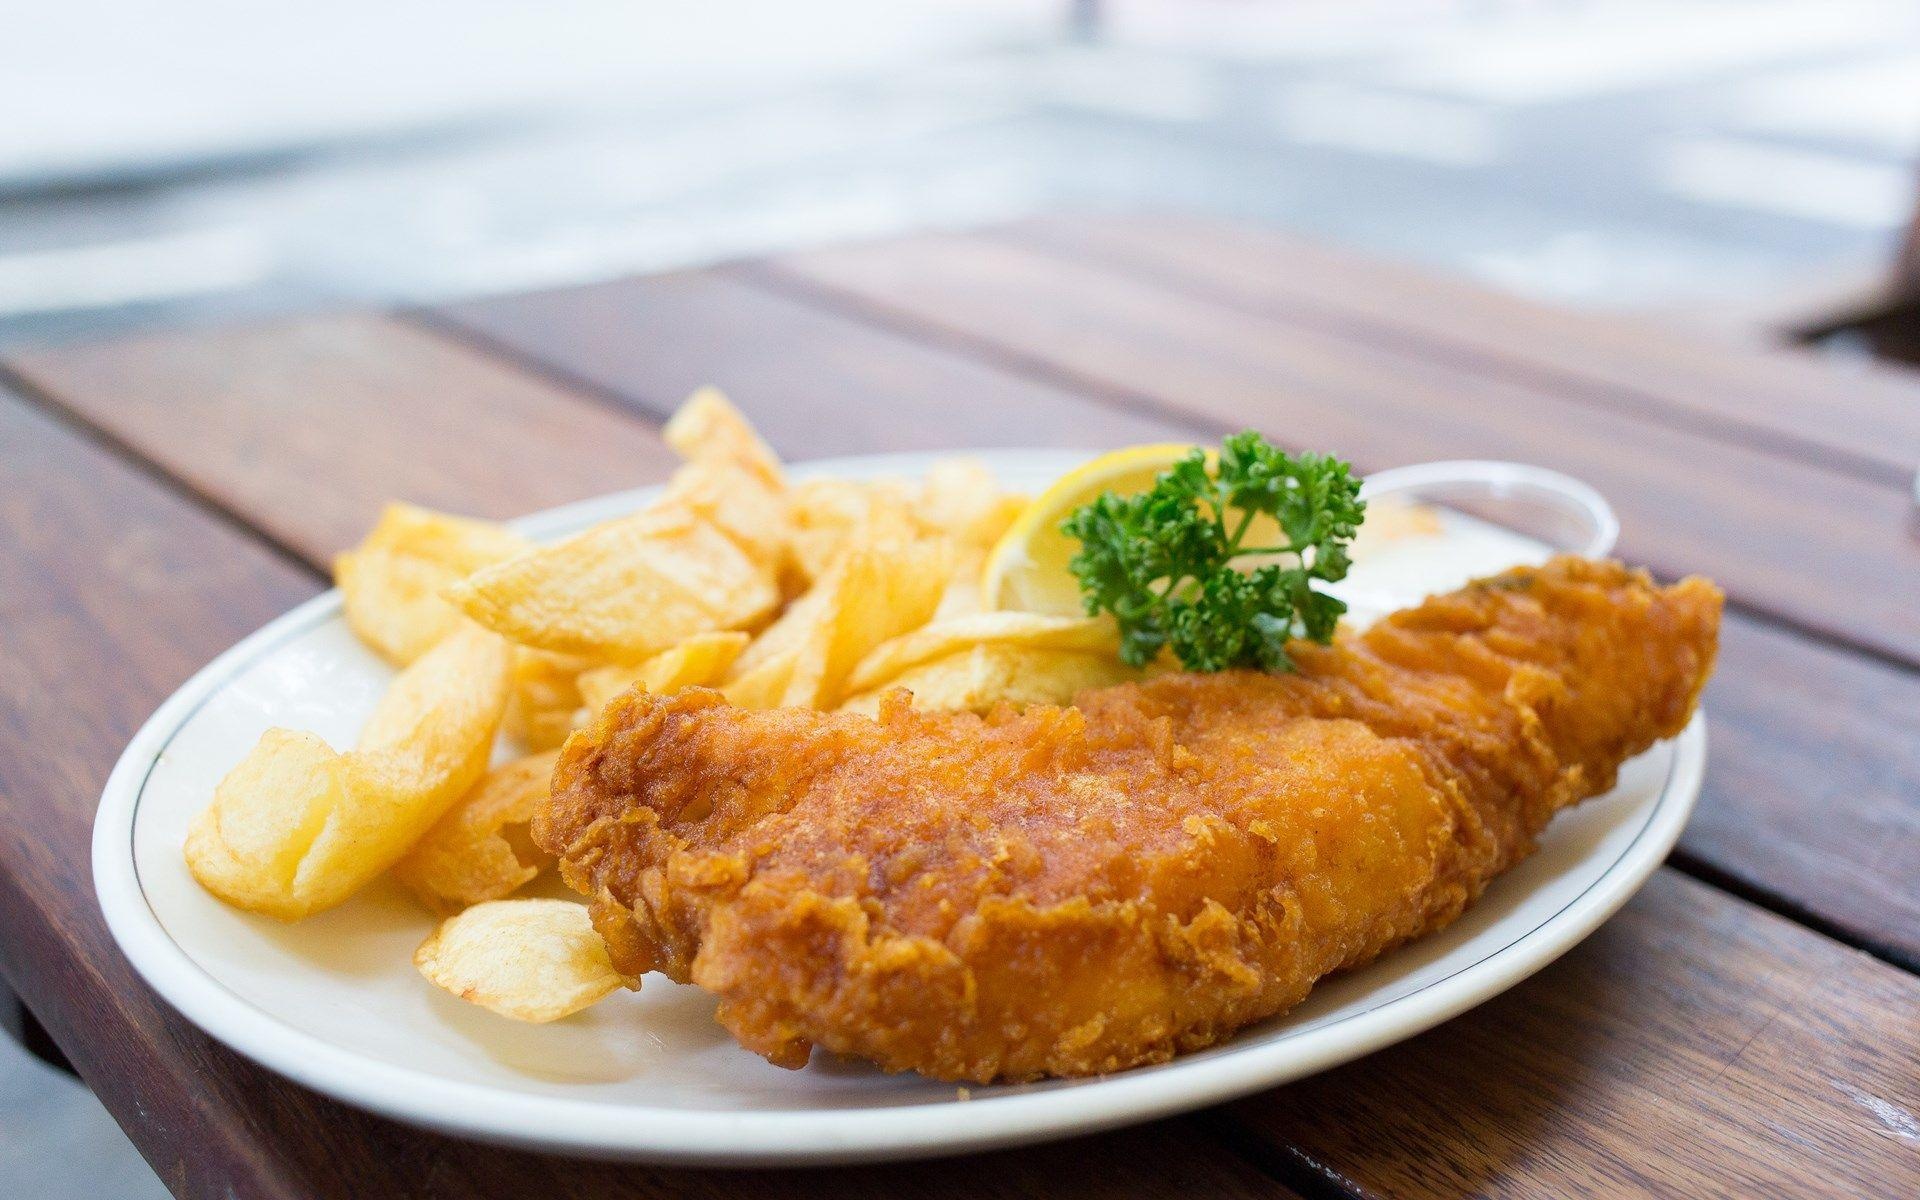 Delicious fish and chips, Top free wallpapers, Seafood delight, British cuisine, 1920x1200 HD Desktop